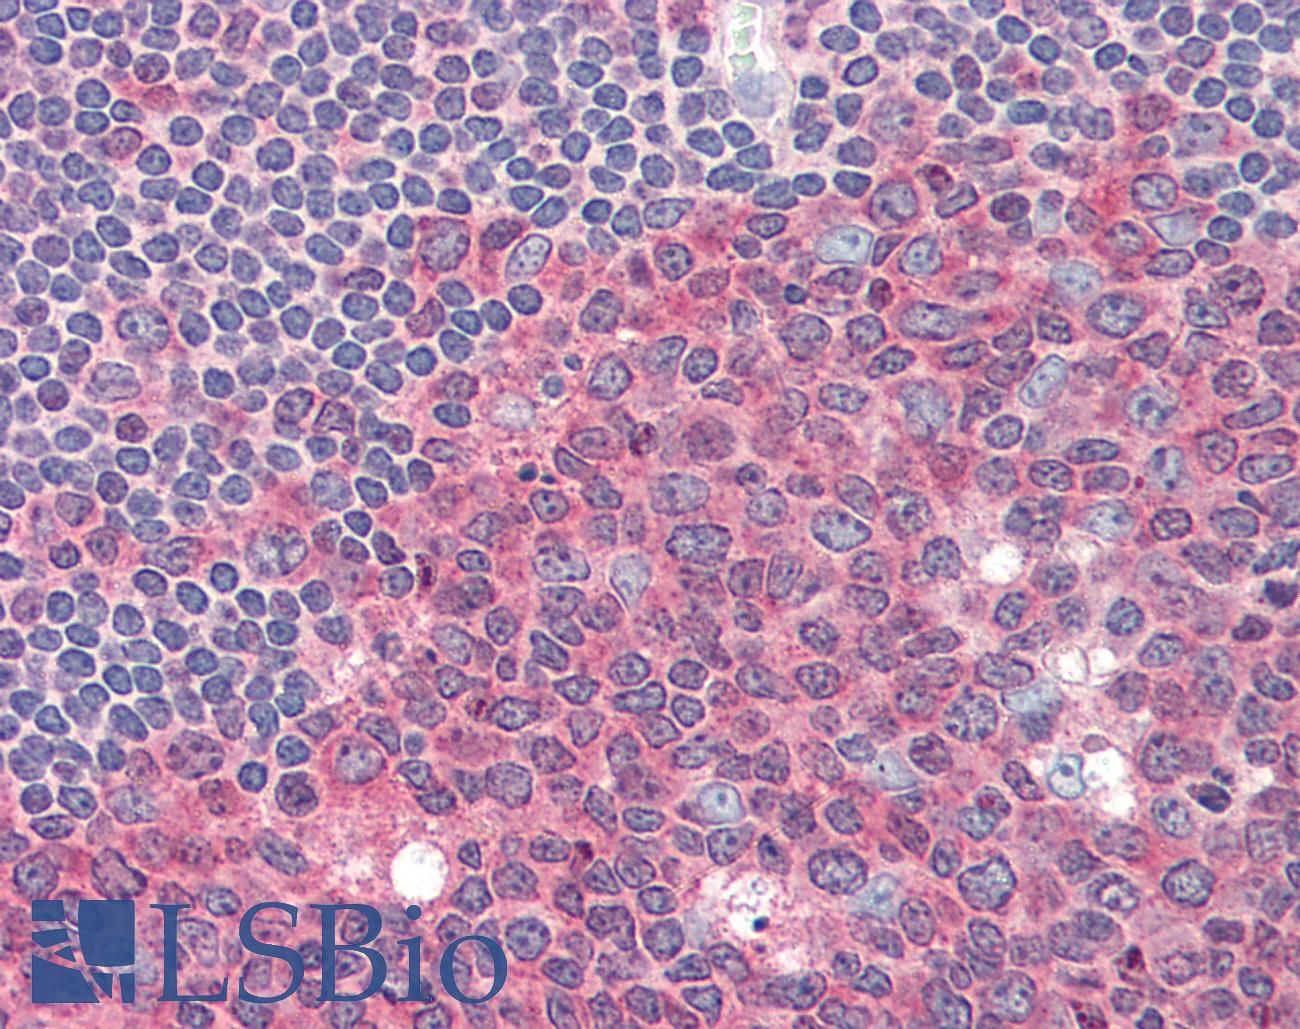 PKM / Pyruvate Kinase, Muscle Antibody - Anti-PKM2 antibody IHC of human tonsil. Immunohistochemistry of formalin-fixed, paraffin-embedded tissue after heat-induced antigen retrieval. Antibody dilution 1:100.